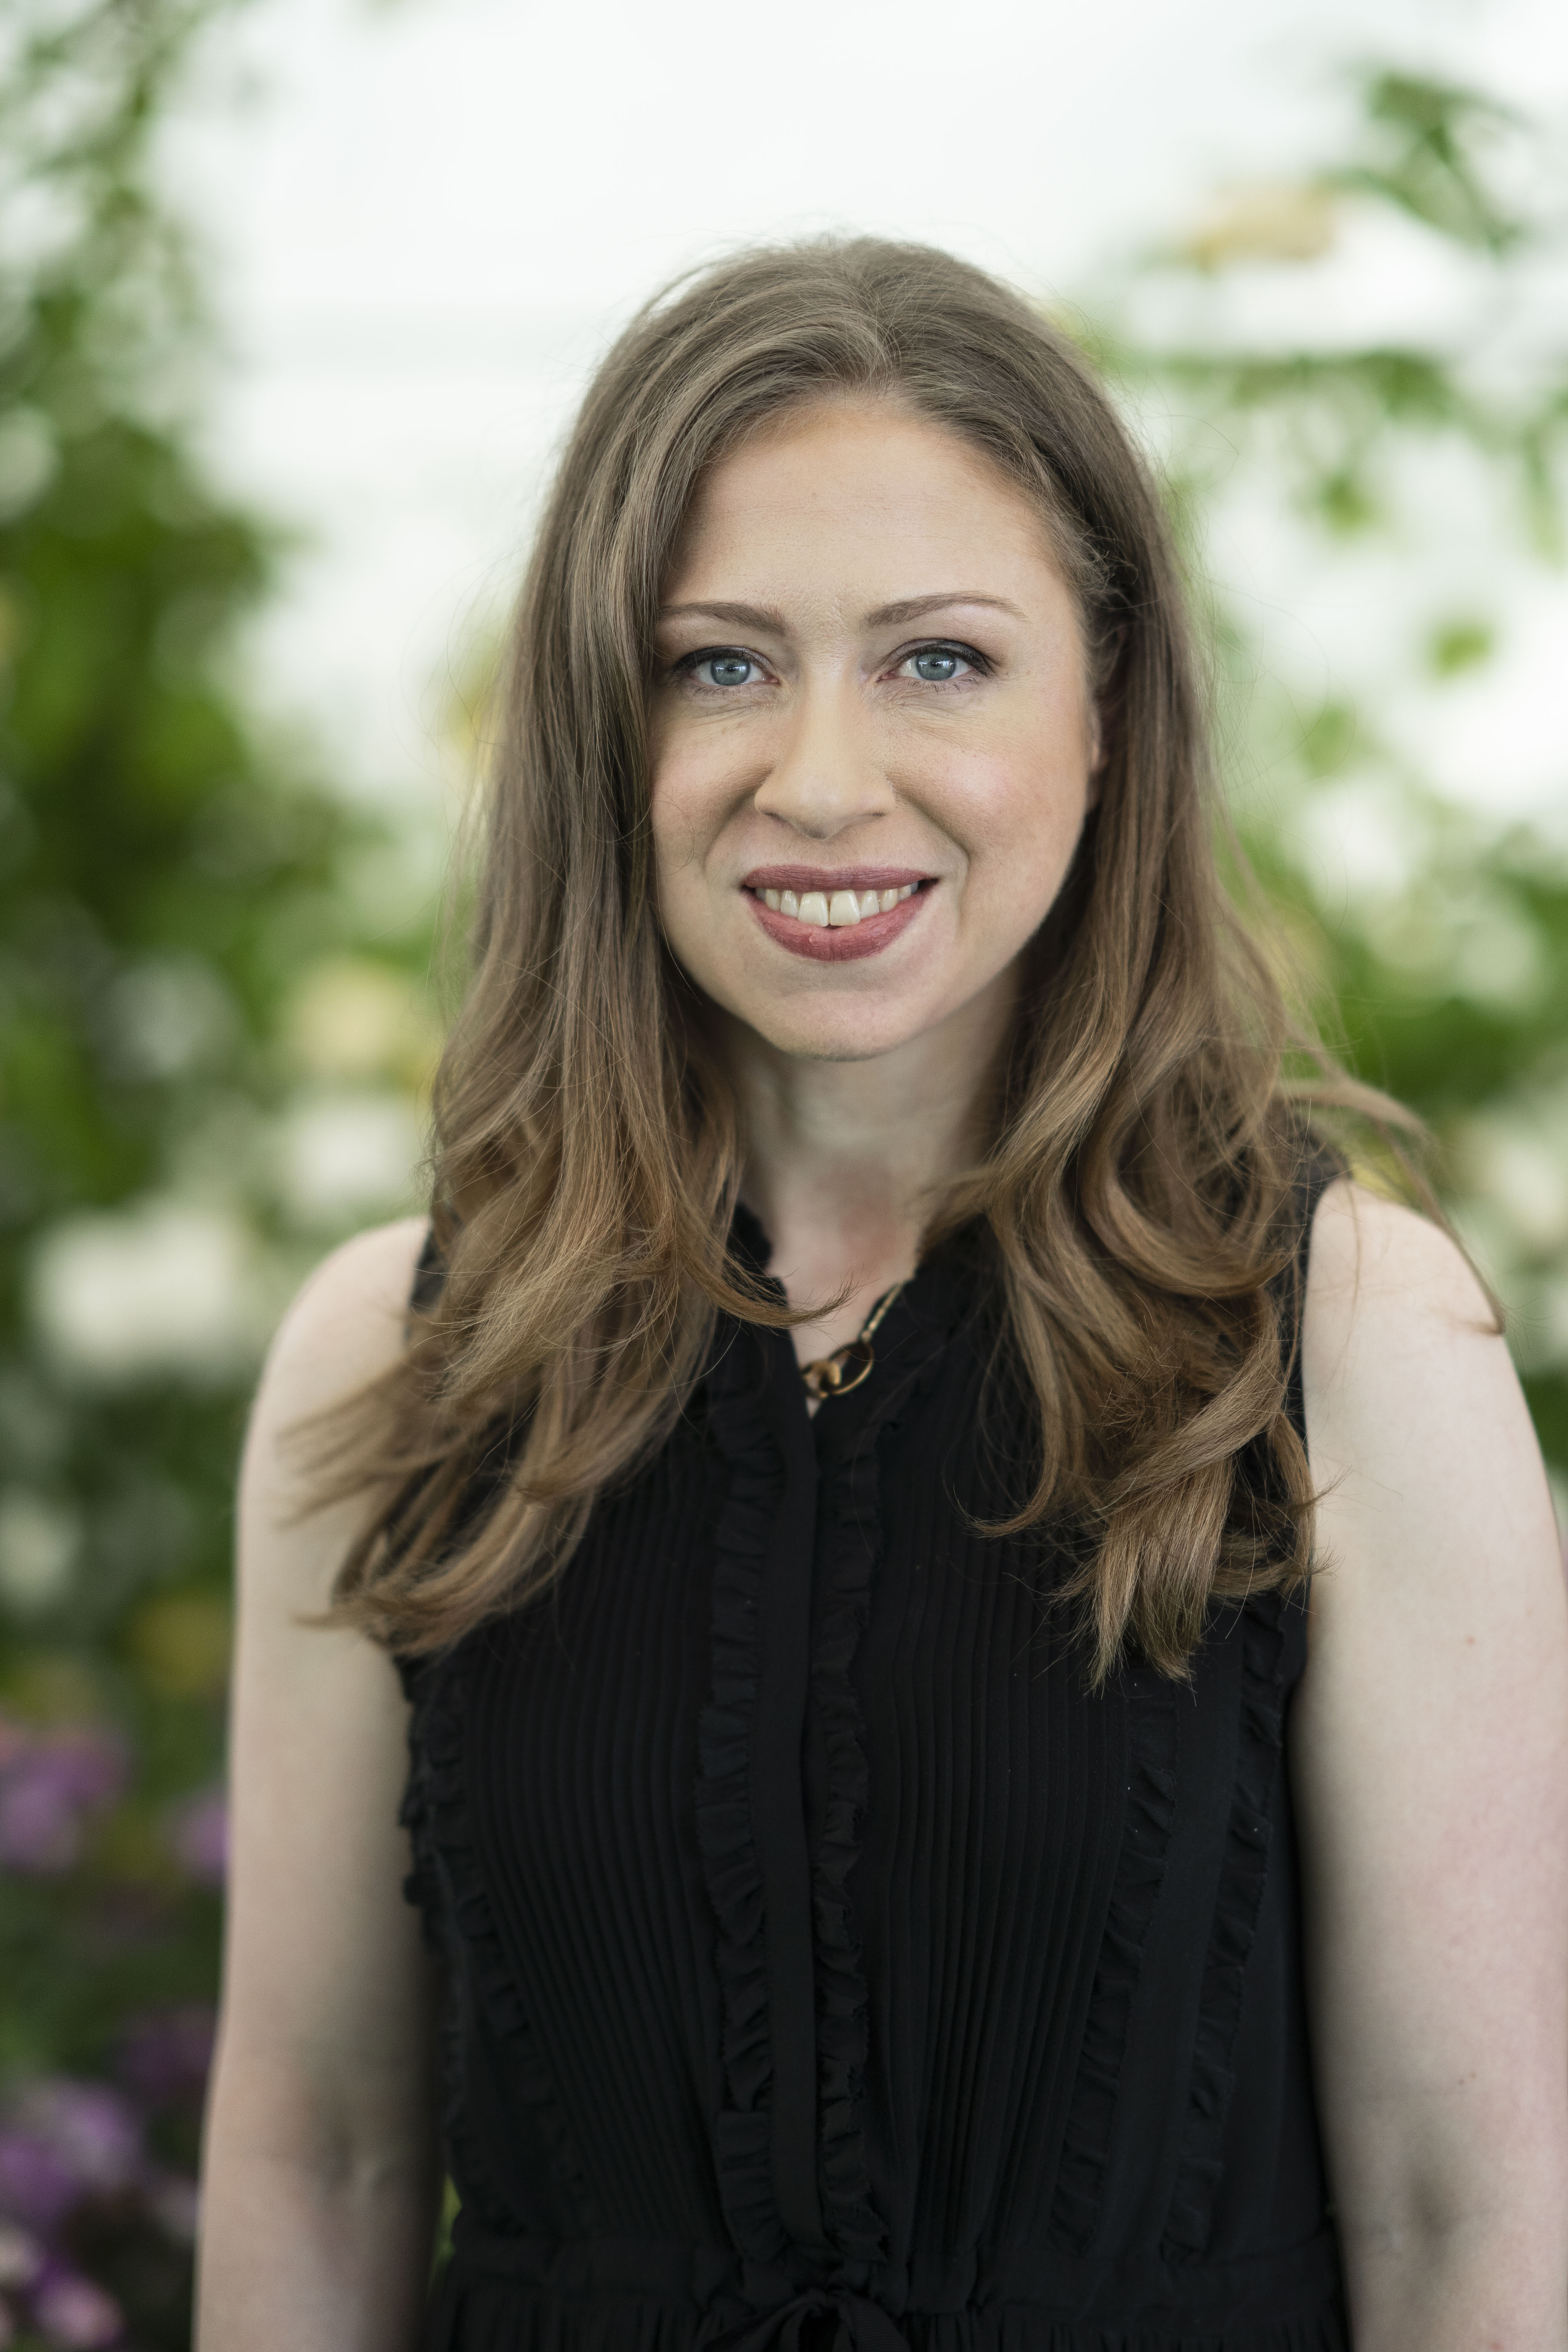 Mother-of-three Chelsea Clinton at the Hay Festival in Wales in 2018. | Photo: Getty Images